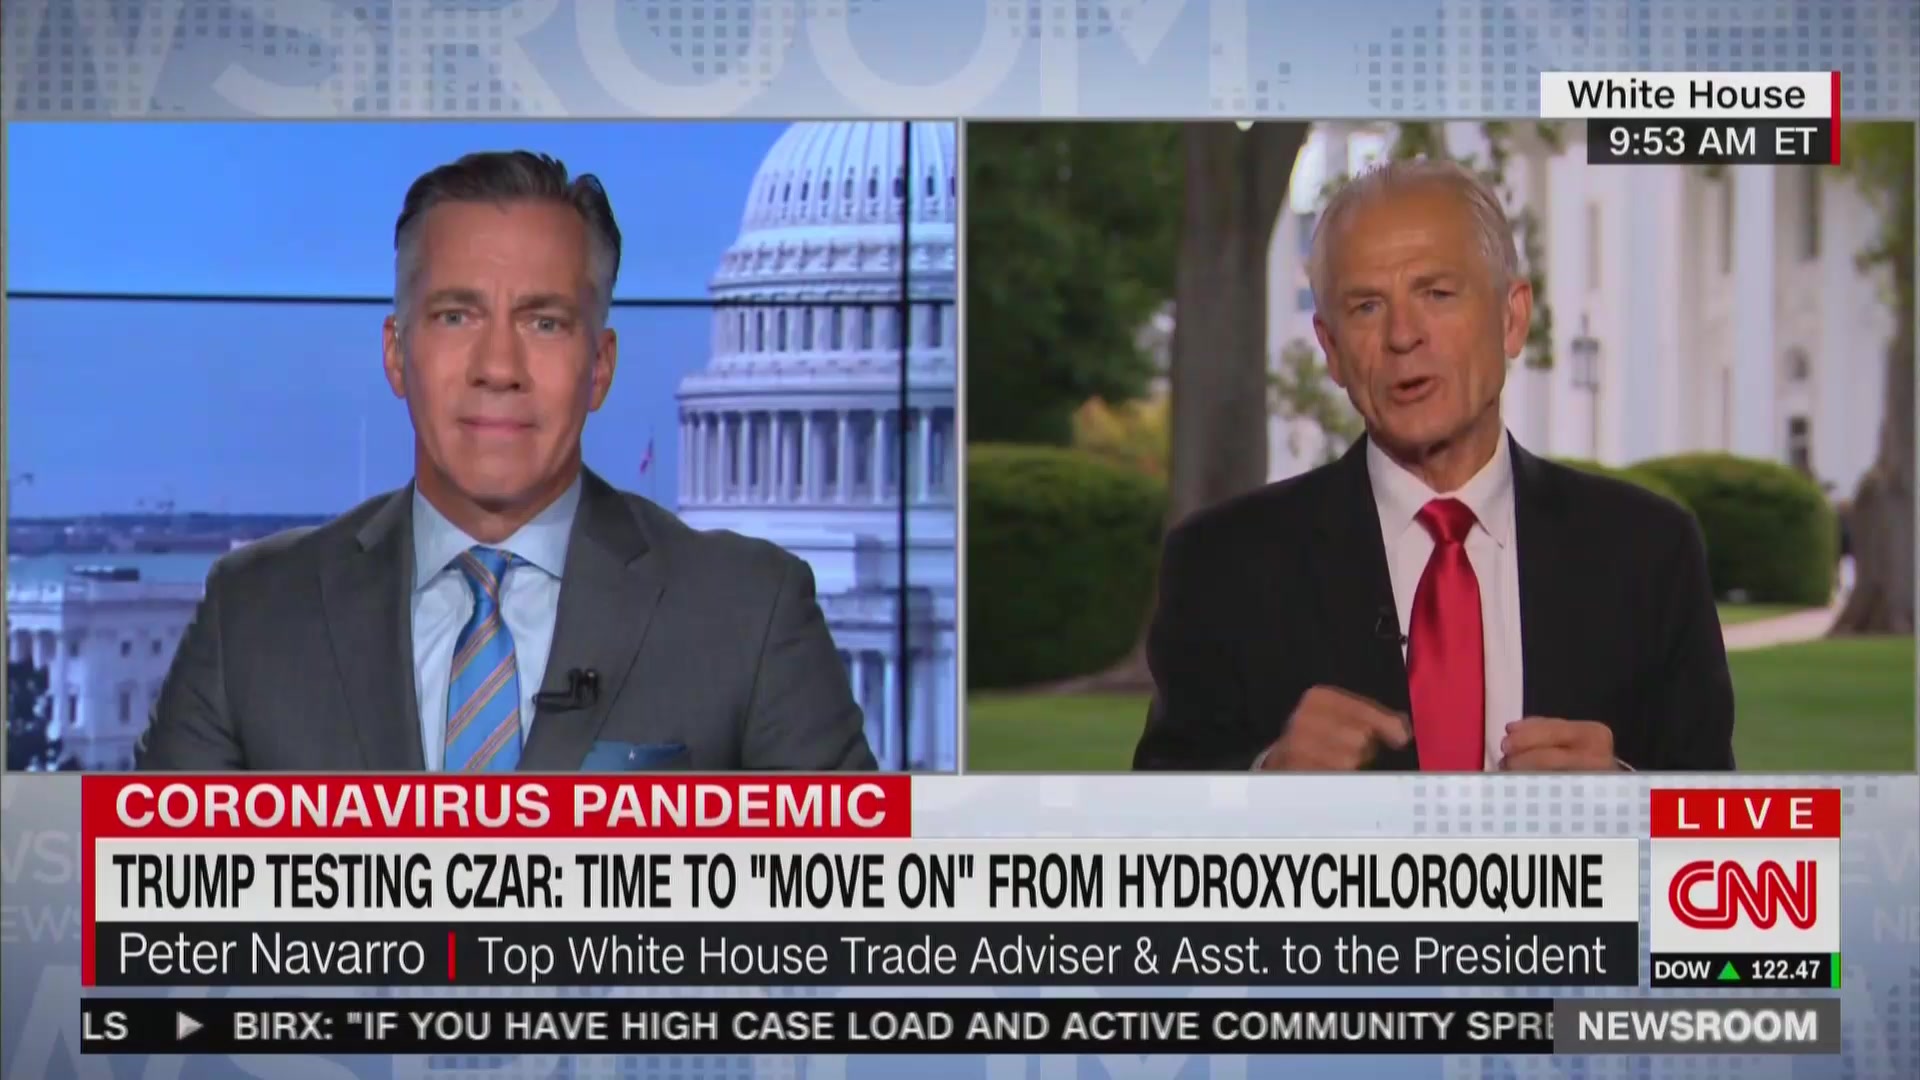 Peter Navarro Tosses Yet Another White House Public Health Expert Under the Bus on Hydroxychloroquine